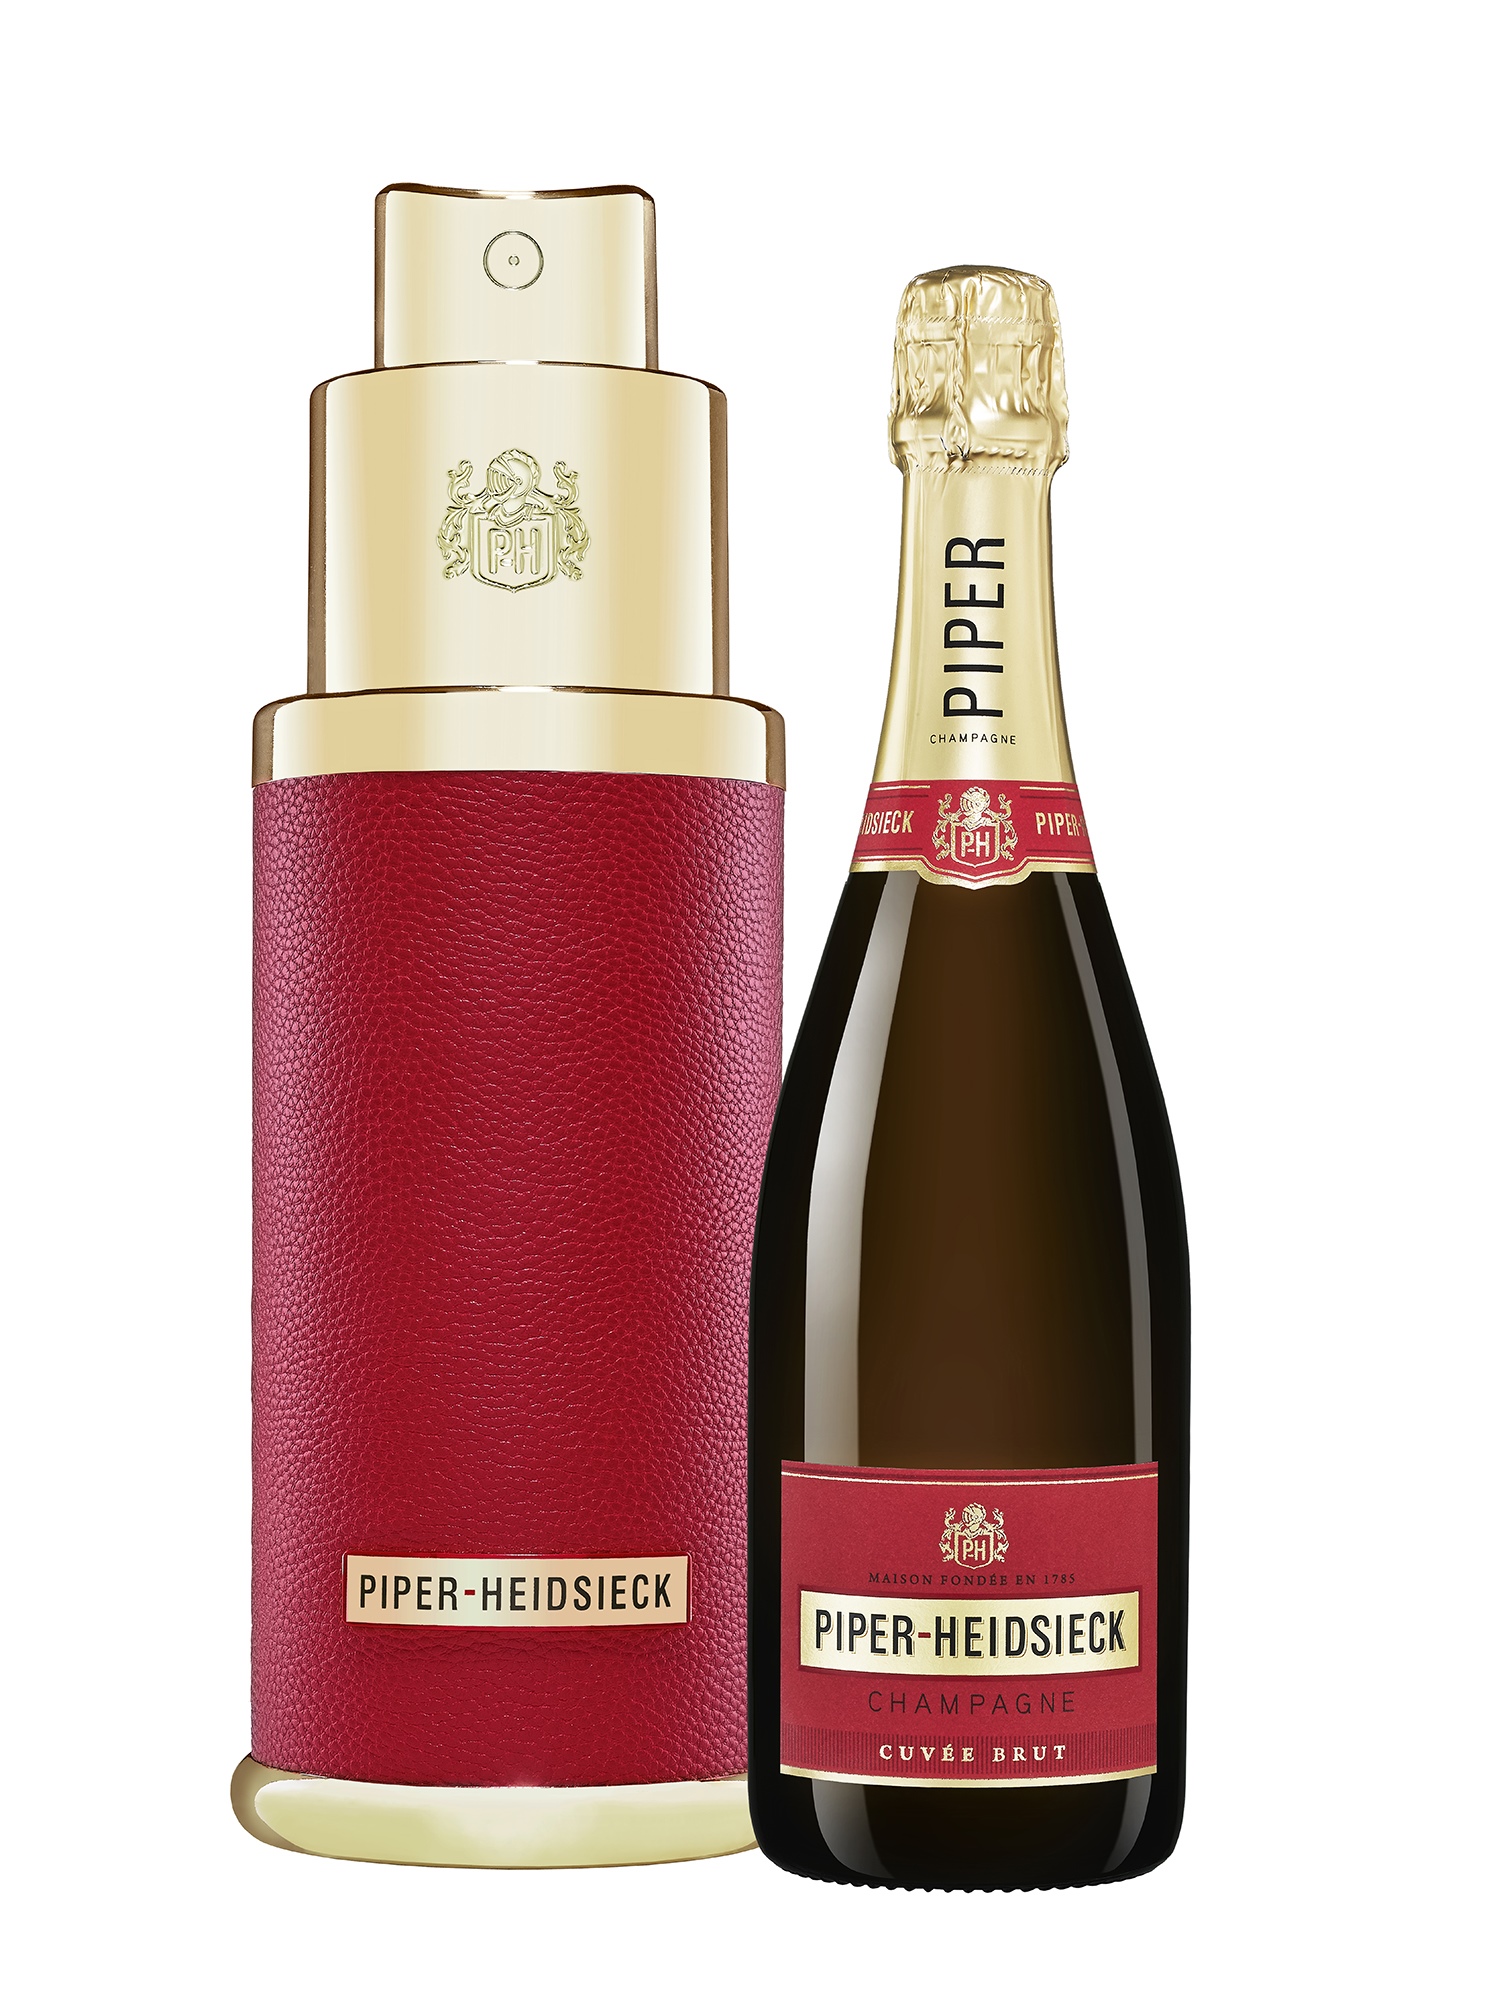 Piper-Heidsieck Champagne Cuvée Brut Perfume Edition